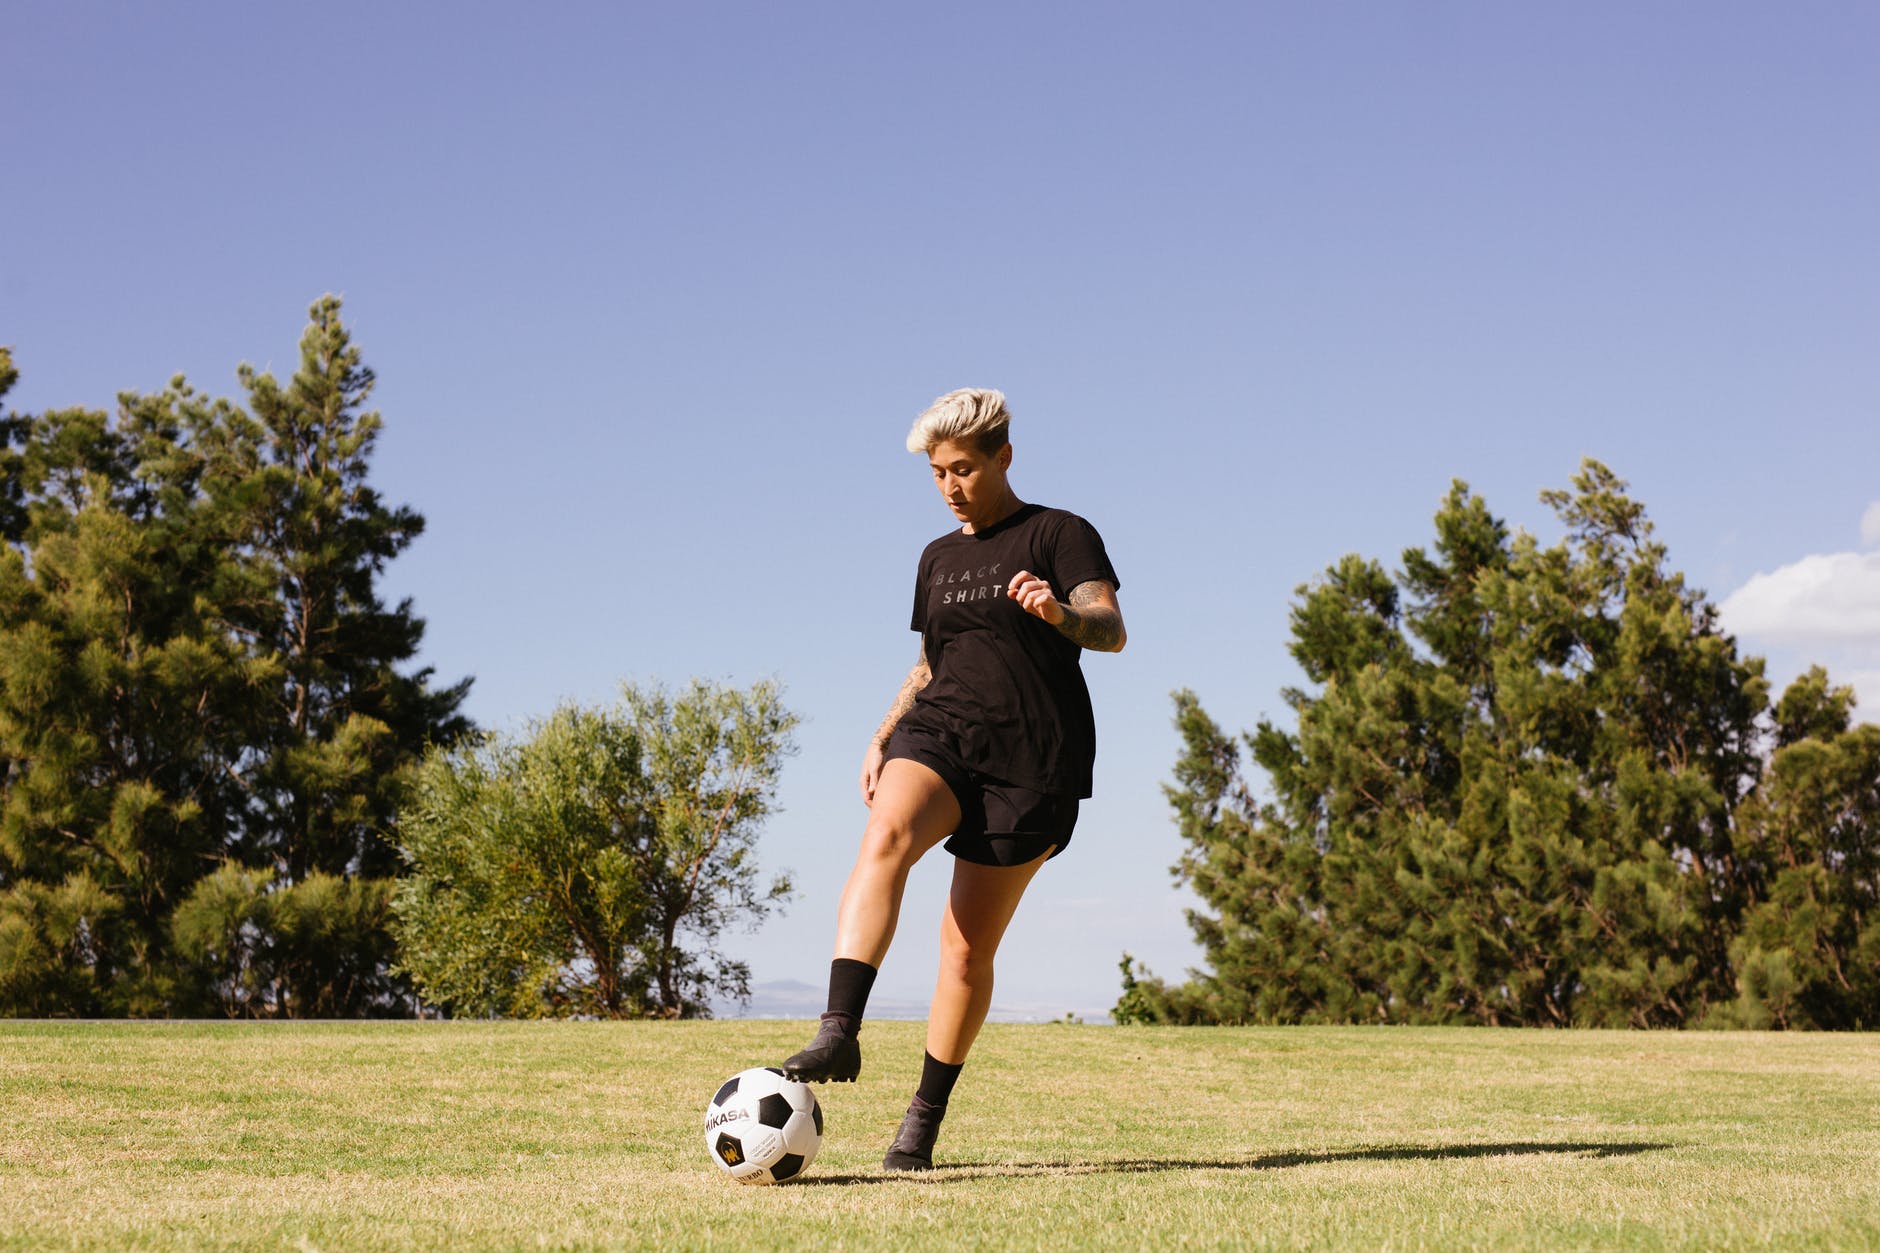 person wearing black shirt and shorts playing soccer